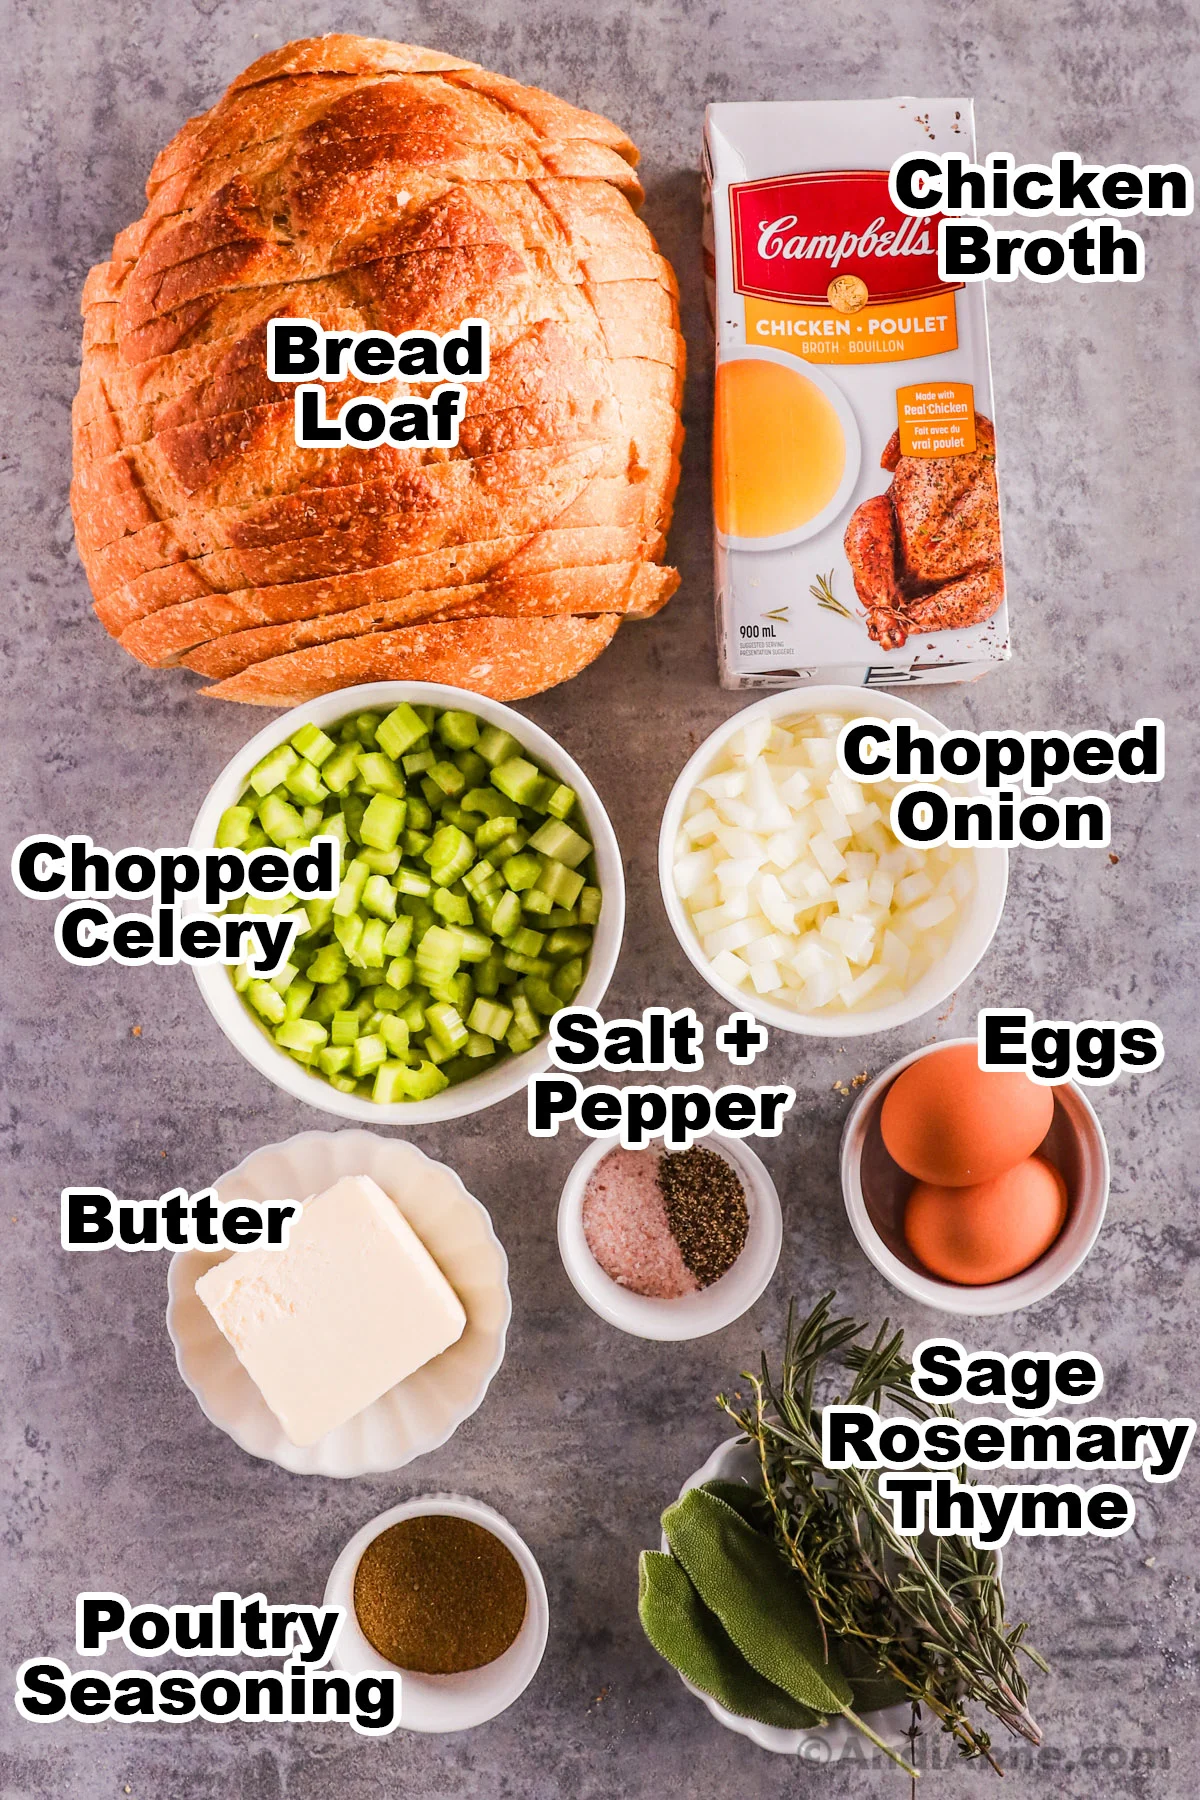 Recipe ingredients on a counter including a loaf of bread, carton of broth, bowls of chopped celery, chopped onion, butter, eggs, salt and pepper, poultry seasoning, and fresh herbs.